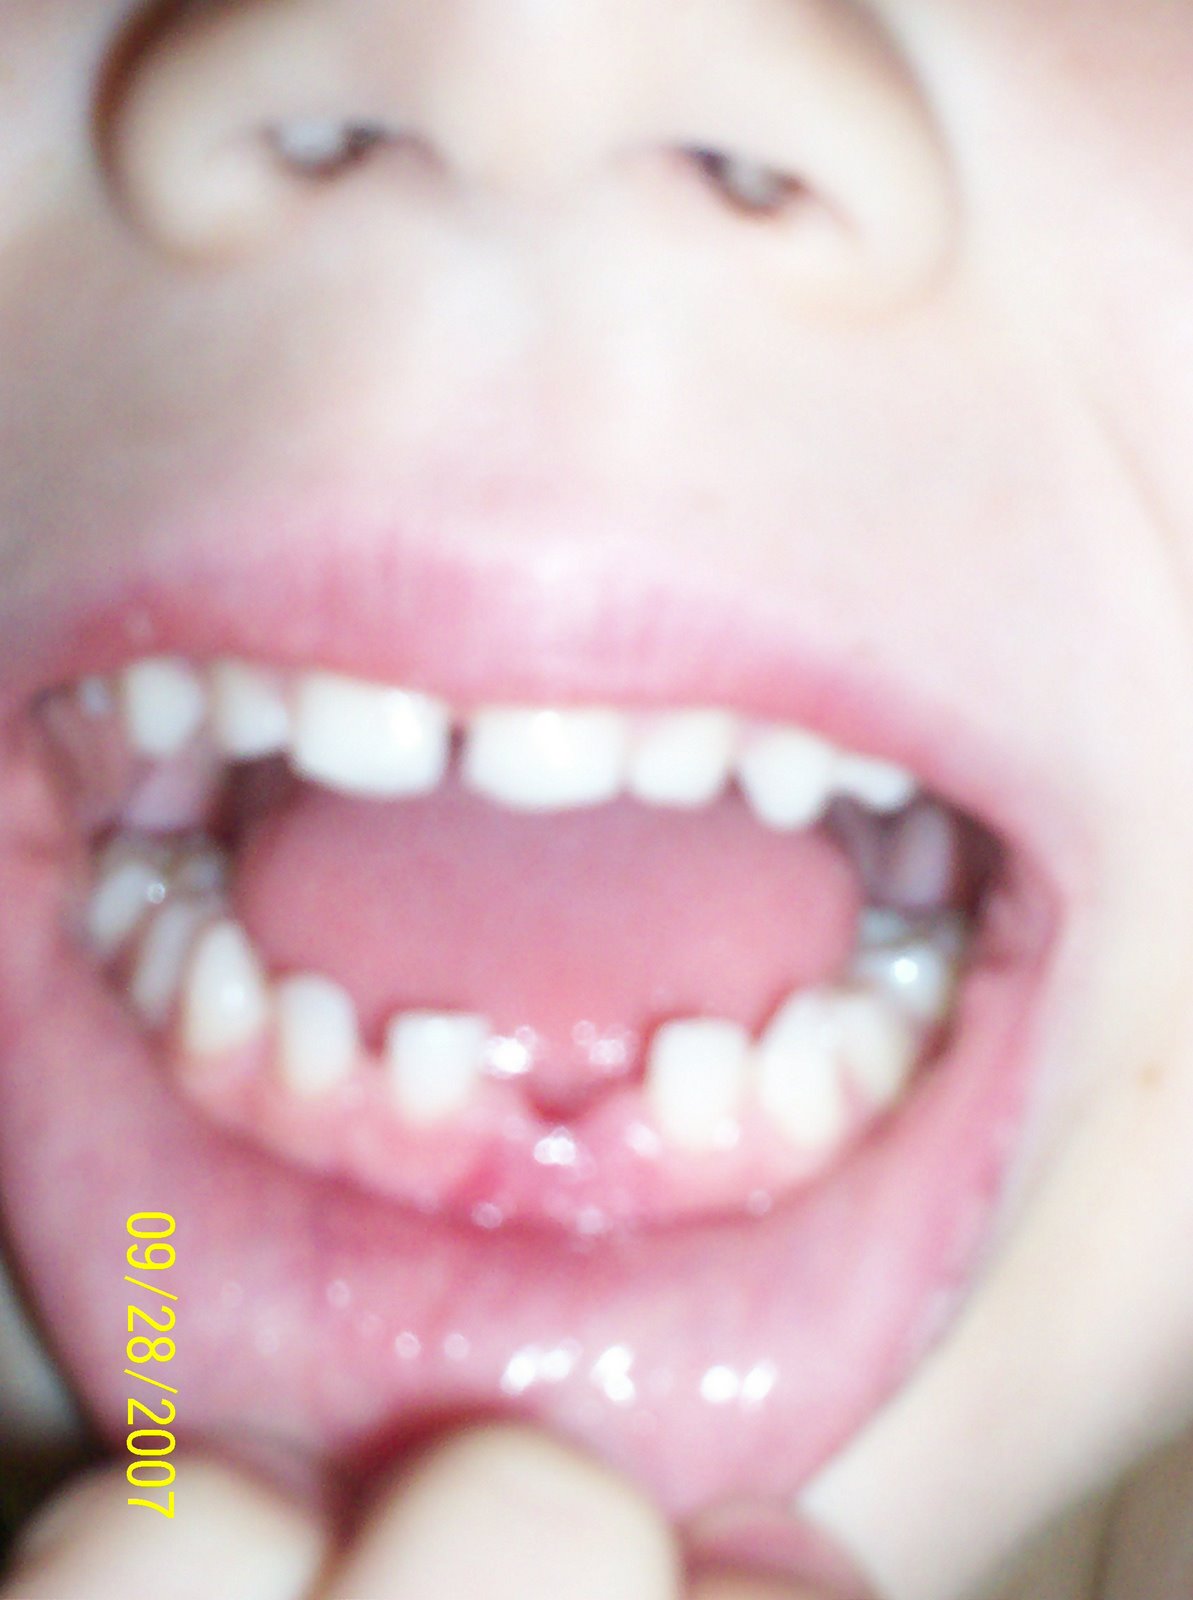 [070928+NBD+first+lost+tooth+hole+in+mouth.jpg]